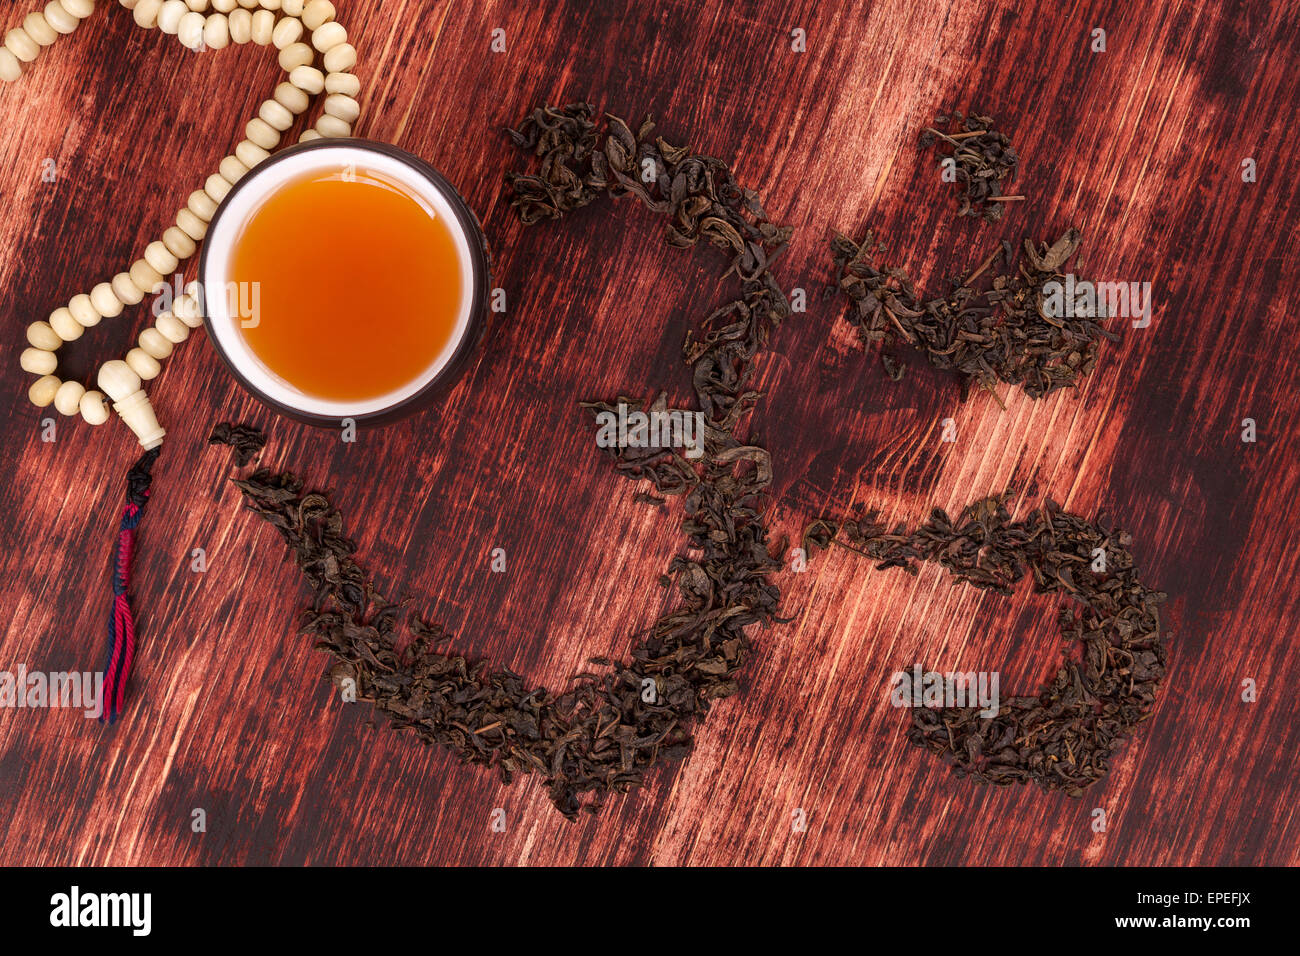 Cup of tea, dry tea leaves forming ohm symbol and buddhist necklace. Traditional tea drinking. Stock Photo